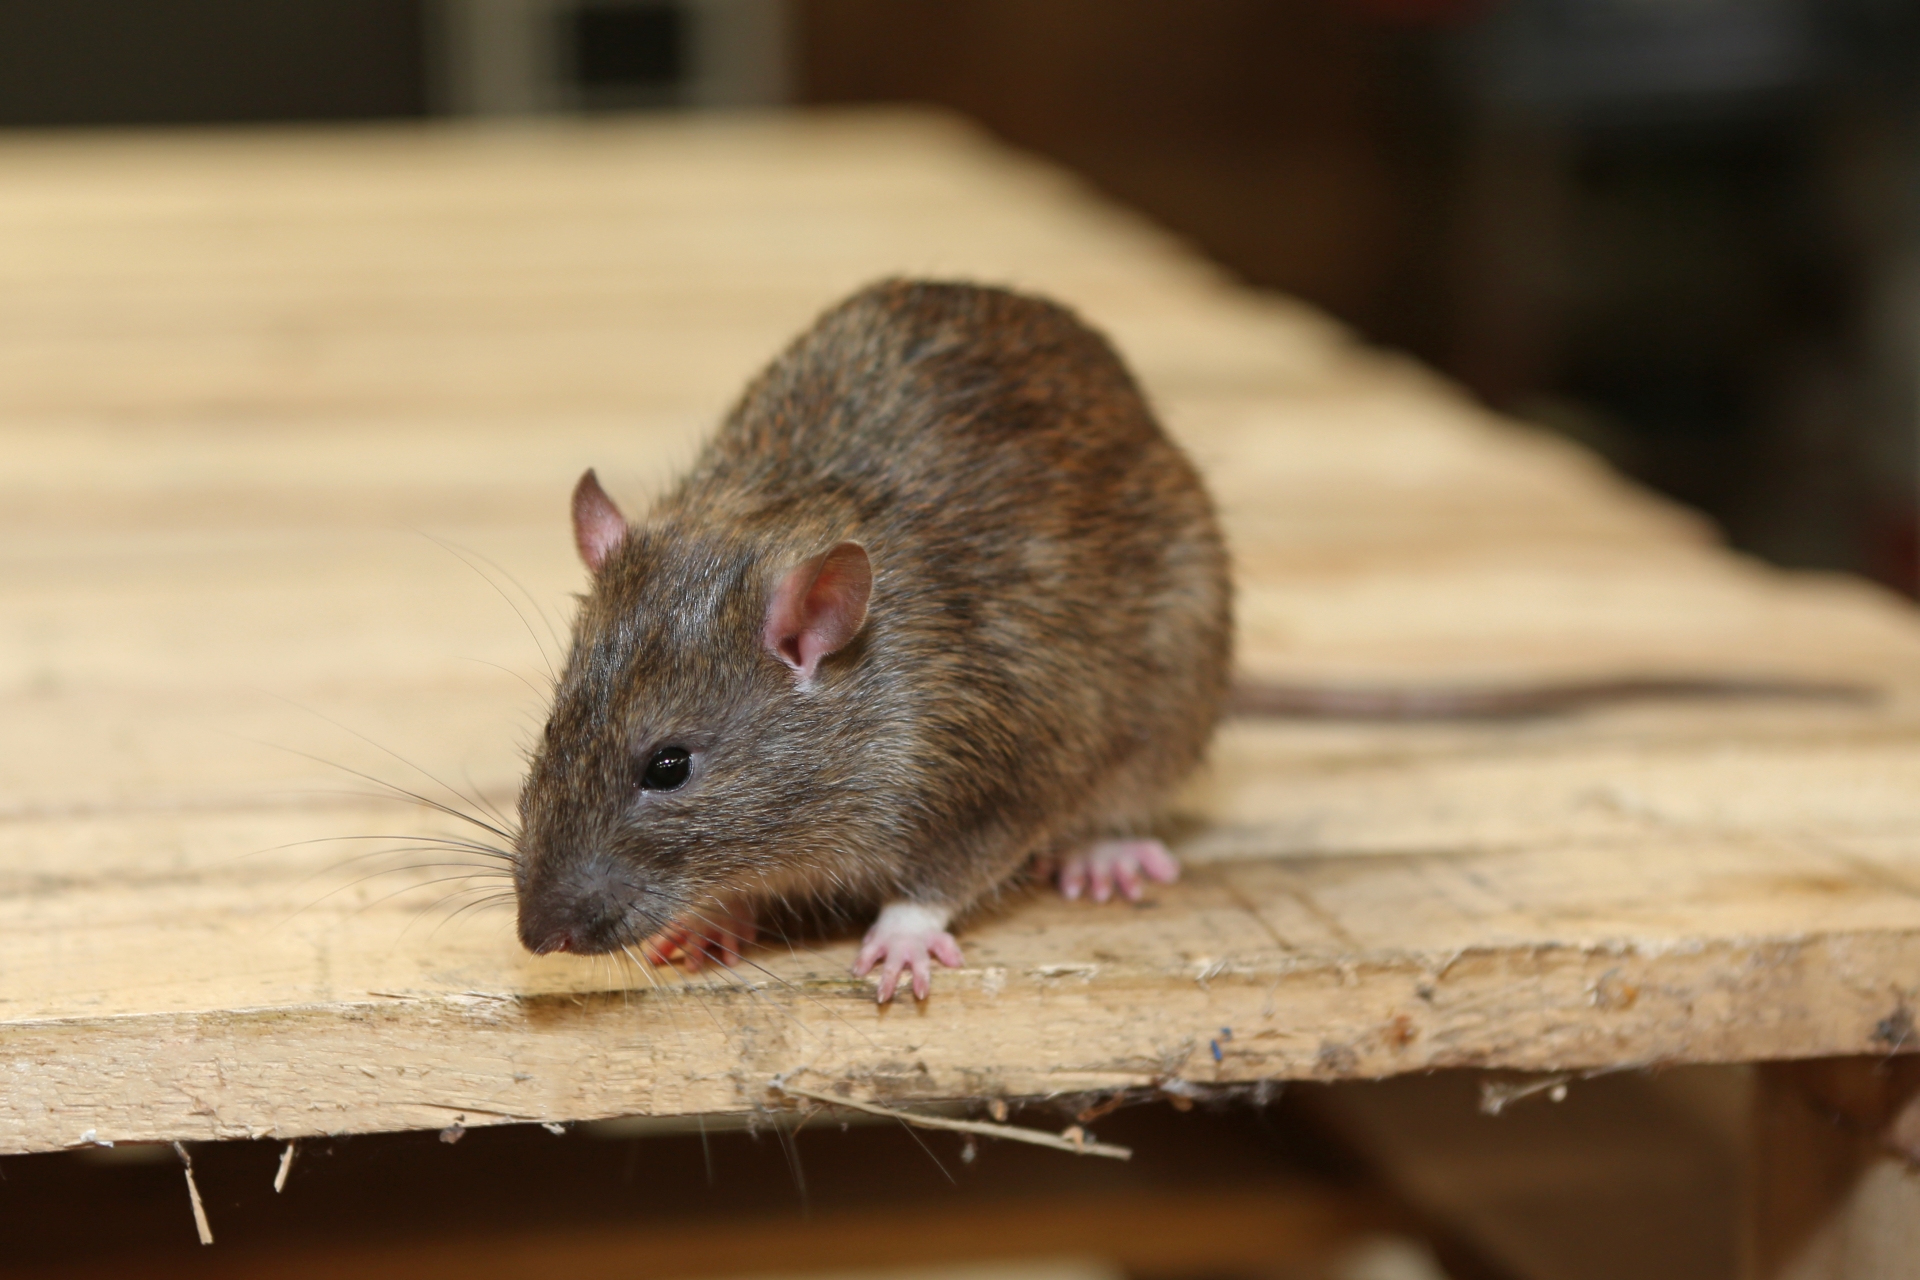 Rat Control, Pest Control in Potters Bar, Cuffley, Northaw, EN6. Call Now 020 8166 9746